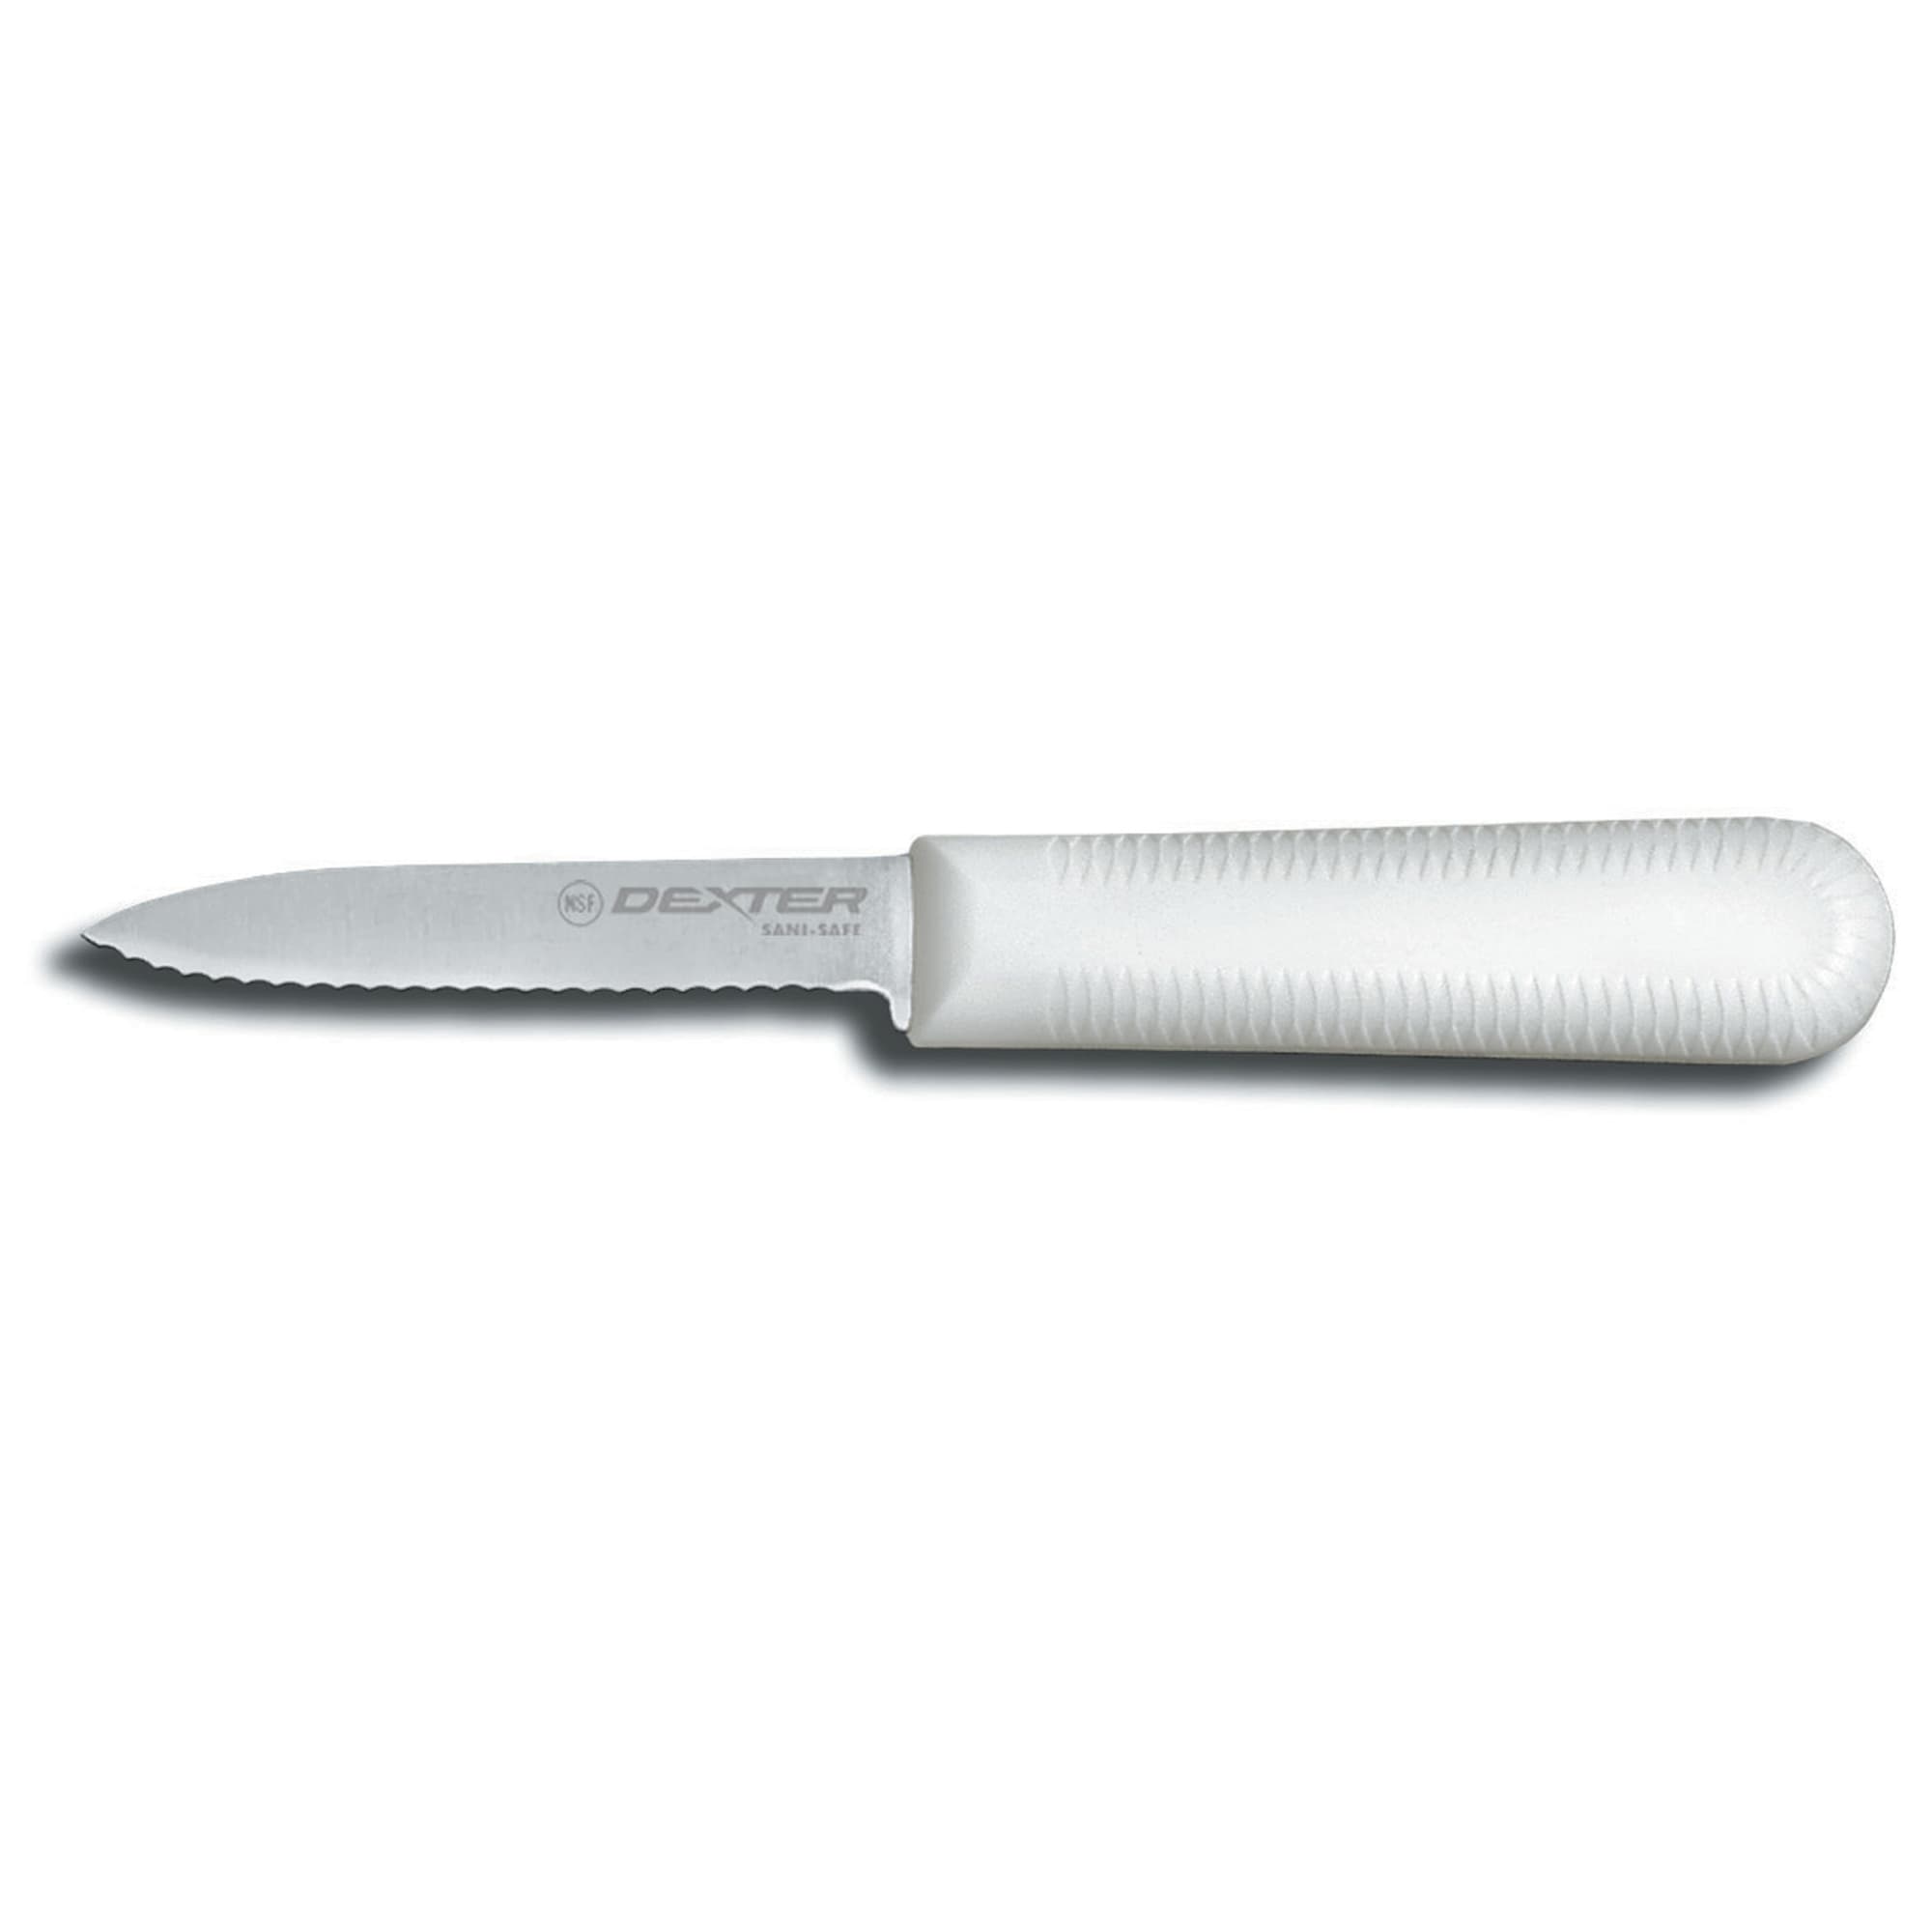 Dexter Russell S104SC-PCP Sani-Safe 3-1/4 Inch Scalloped Paring Knife